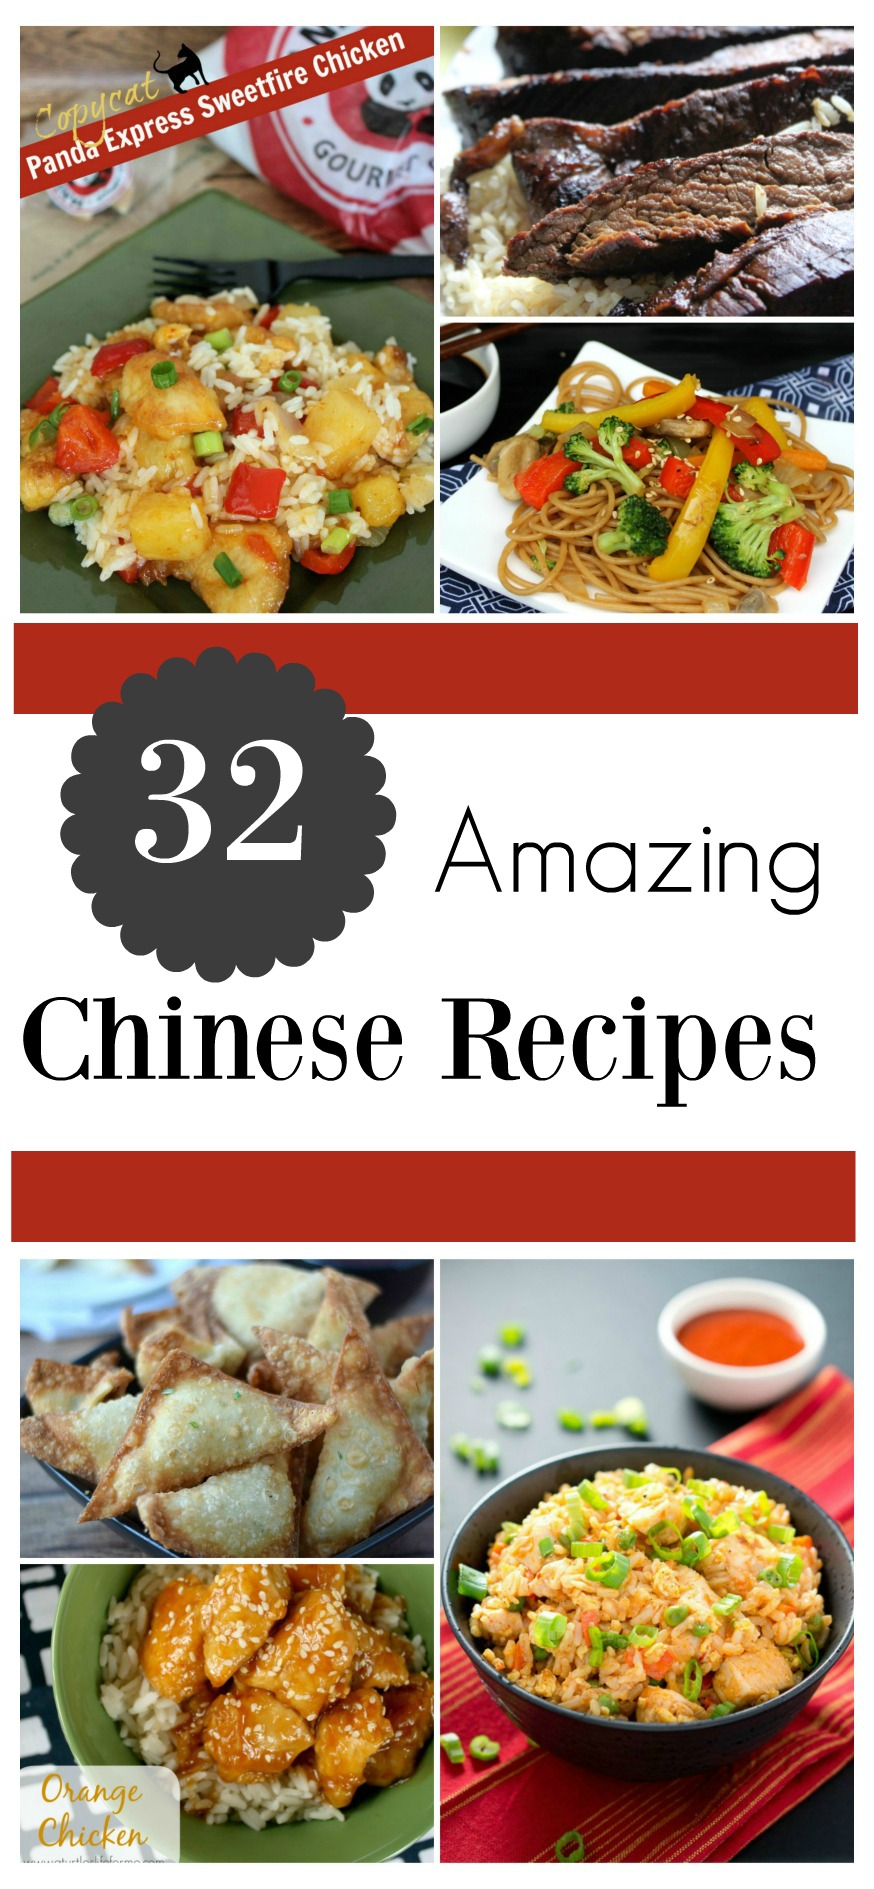 Does your family love Chinese take out? Check out these 32 Amazing Chinese Recipes, including copycat recipes & healthy version of your favorite dishes here! 